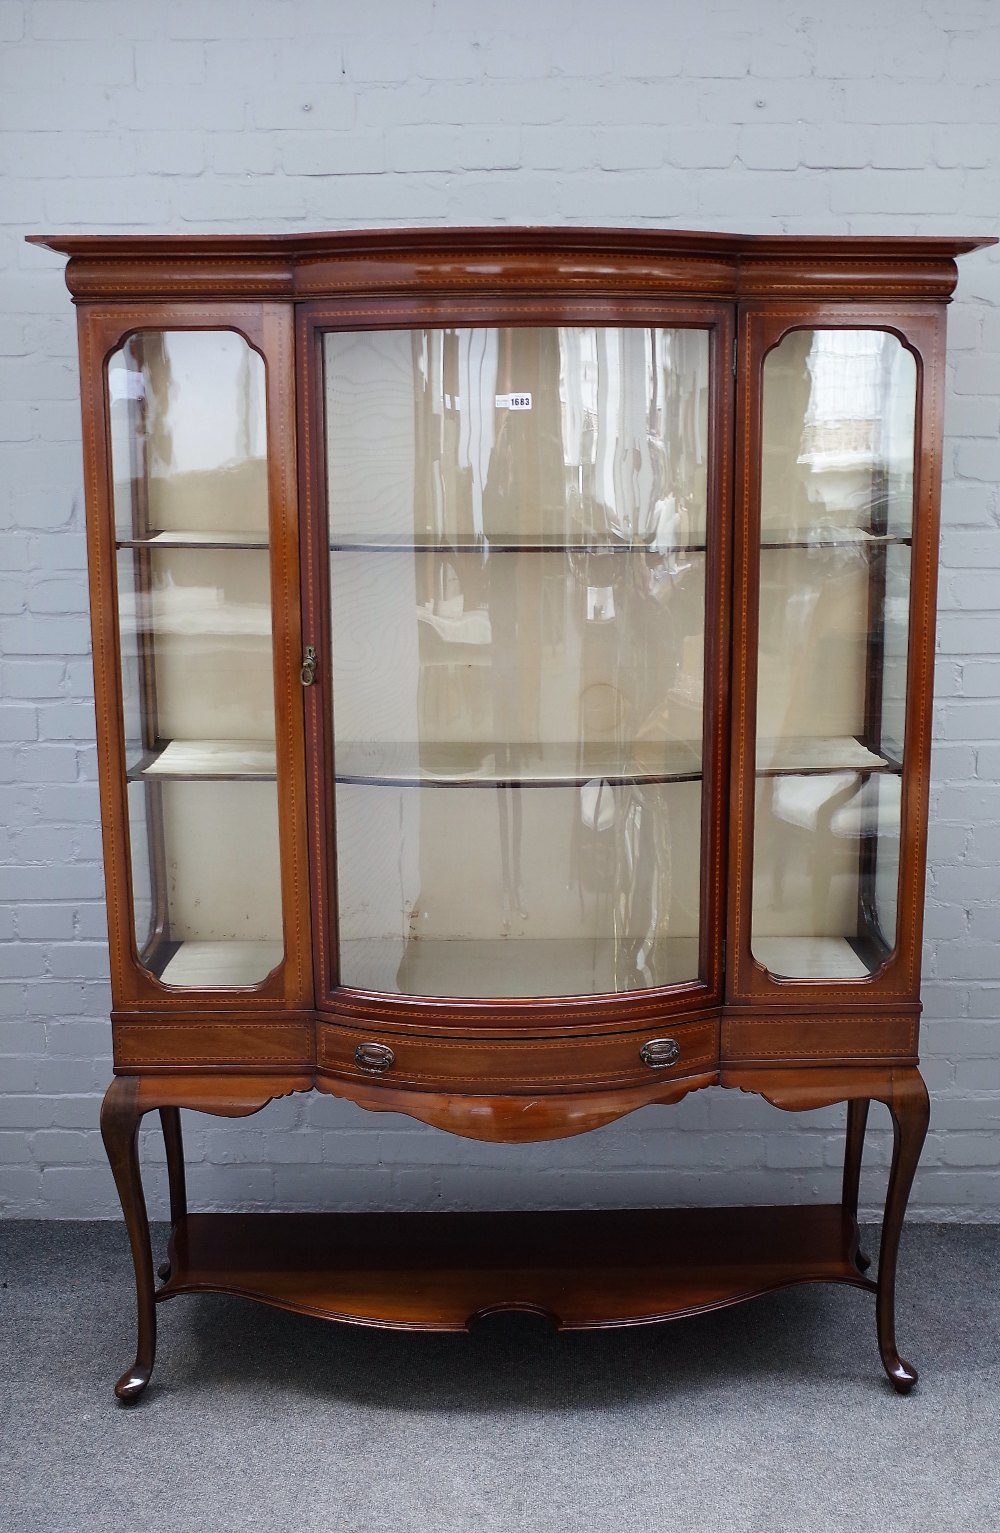 An Edwardian inlaid mahogany bowfront display cabinet with single door over drawer on cabriole